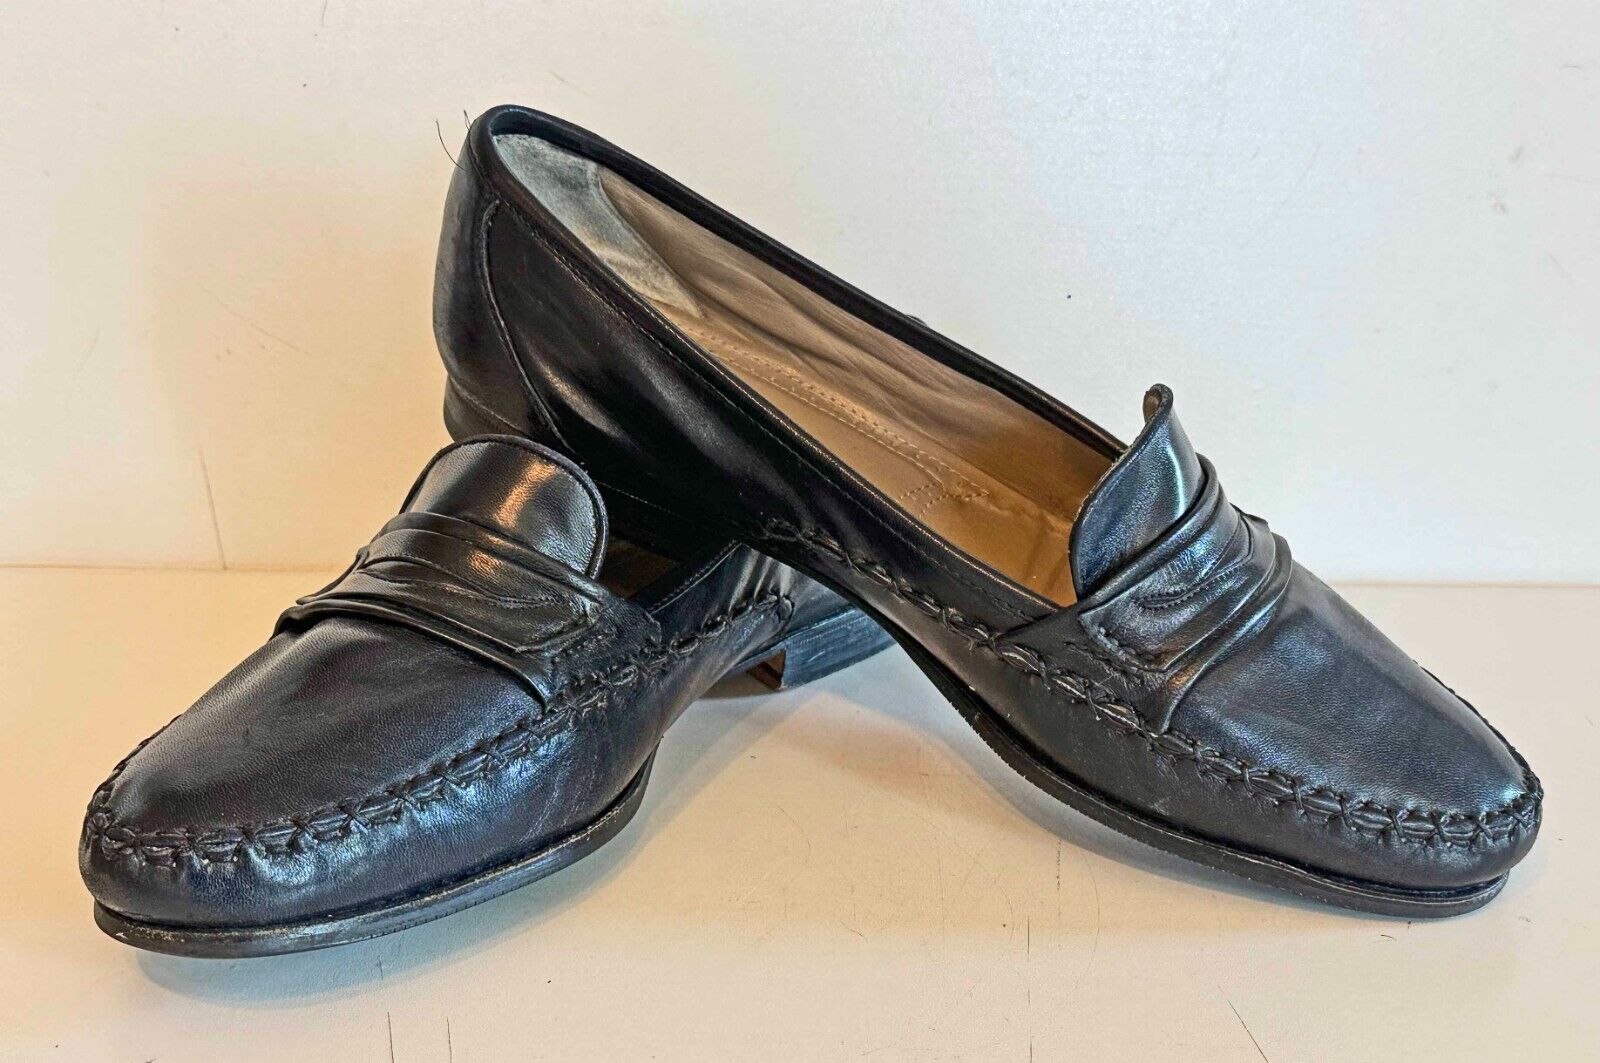 BALLY Classic Black Leather Loafers Slip-On Shoes Made in Italy Size 10.5 W